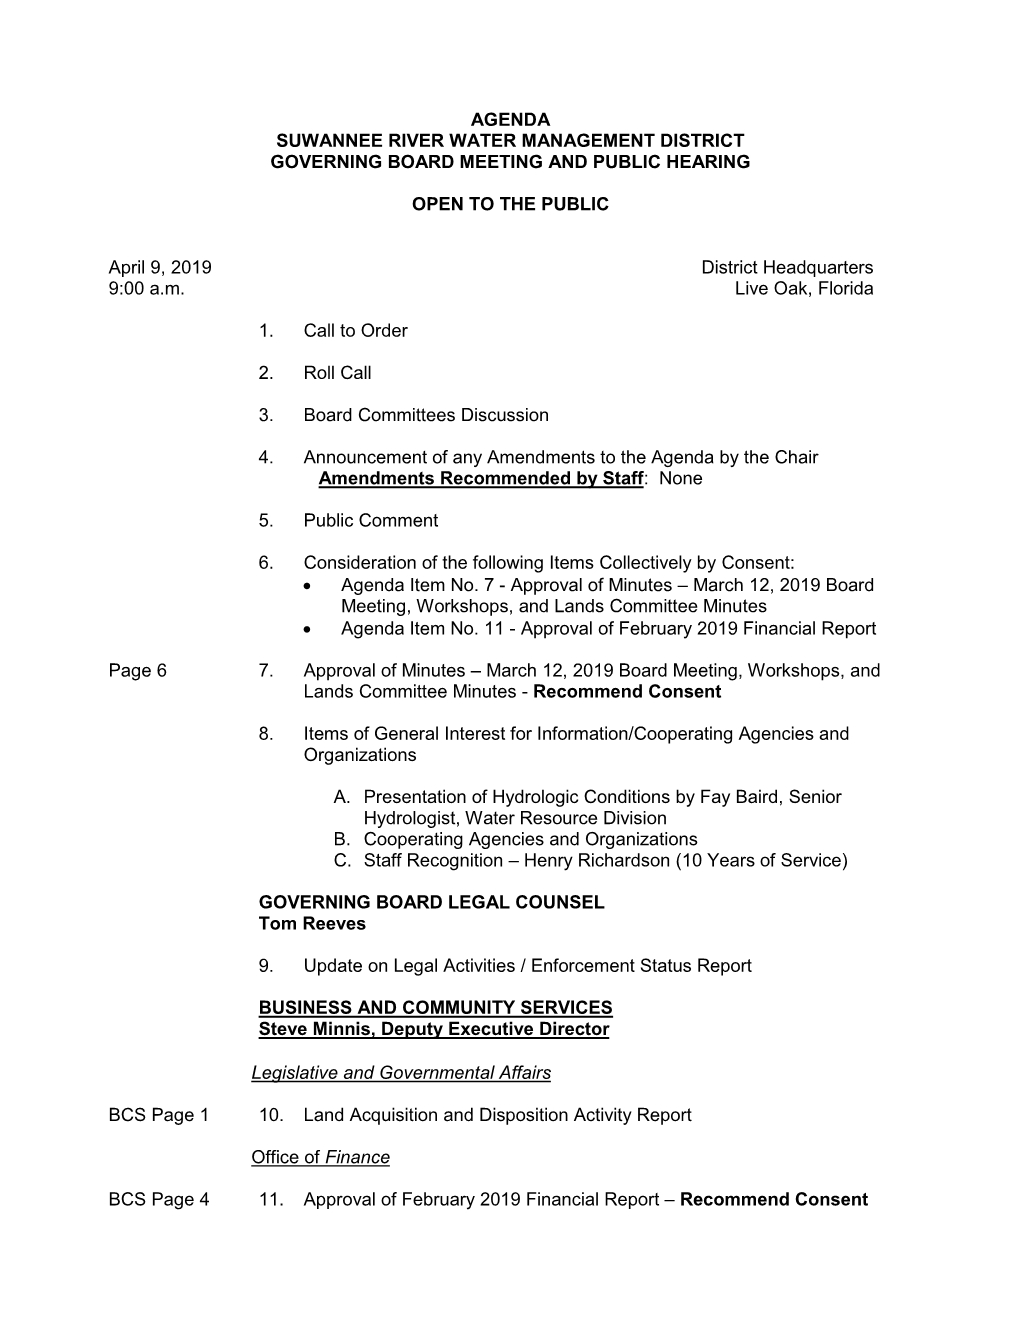 Agenda Suwannee River Water Management District Governing Board Meeting and Public Hearing